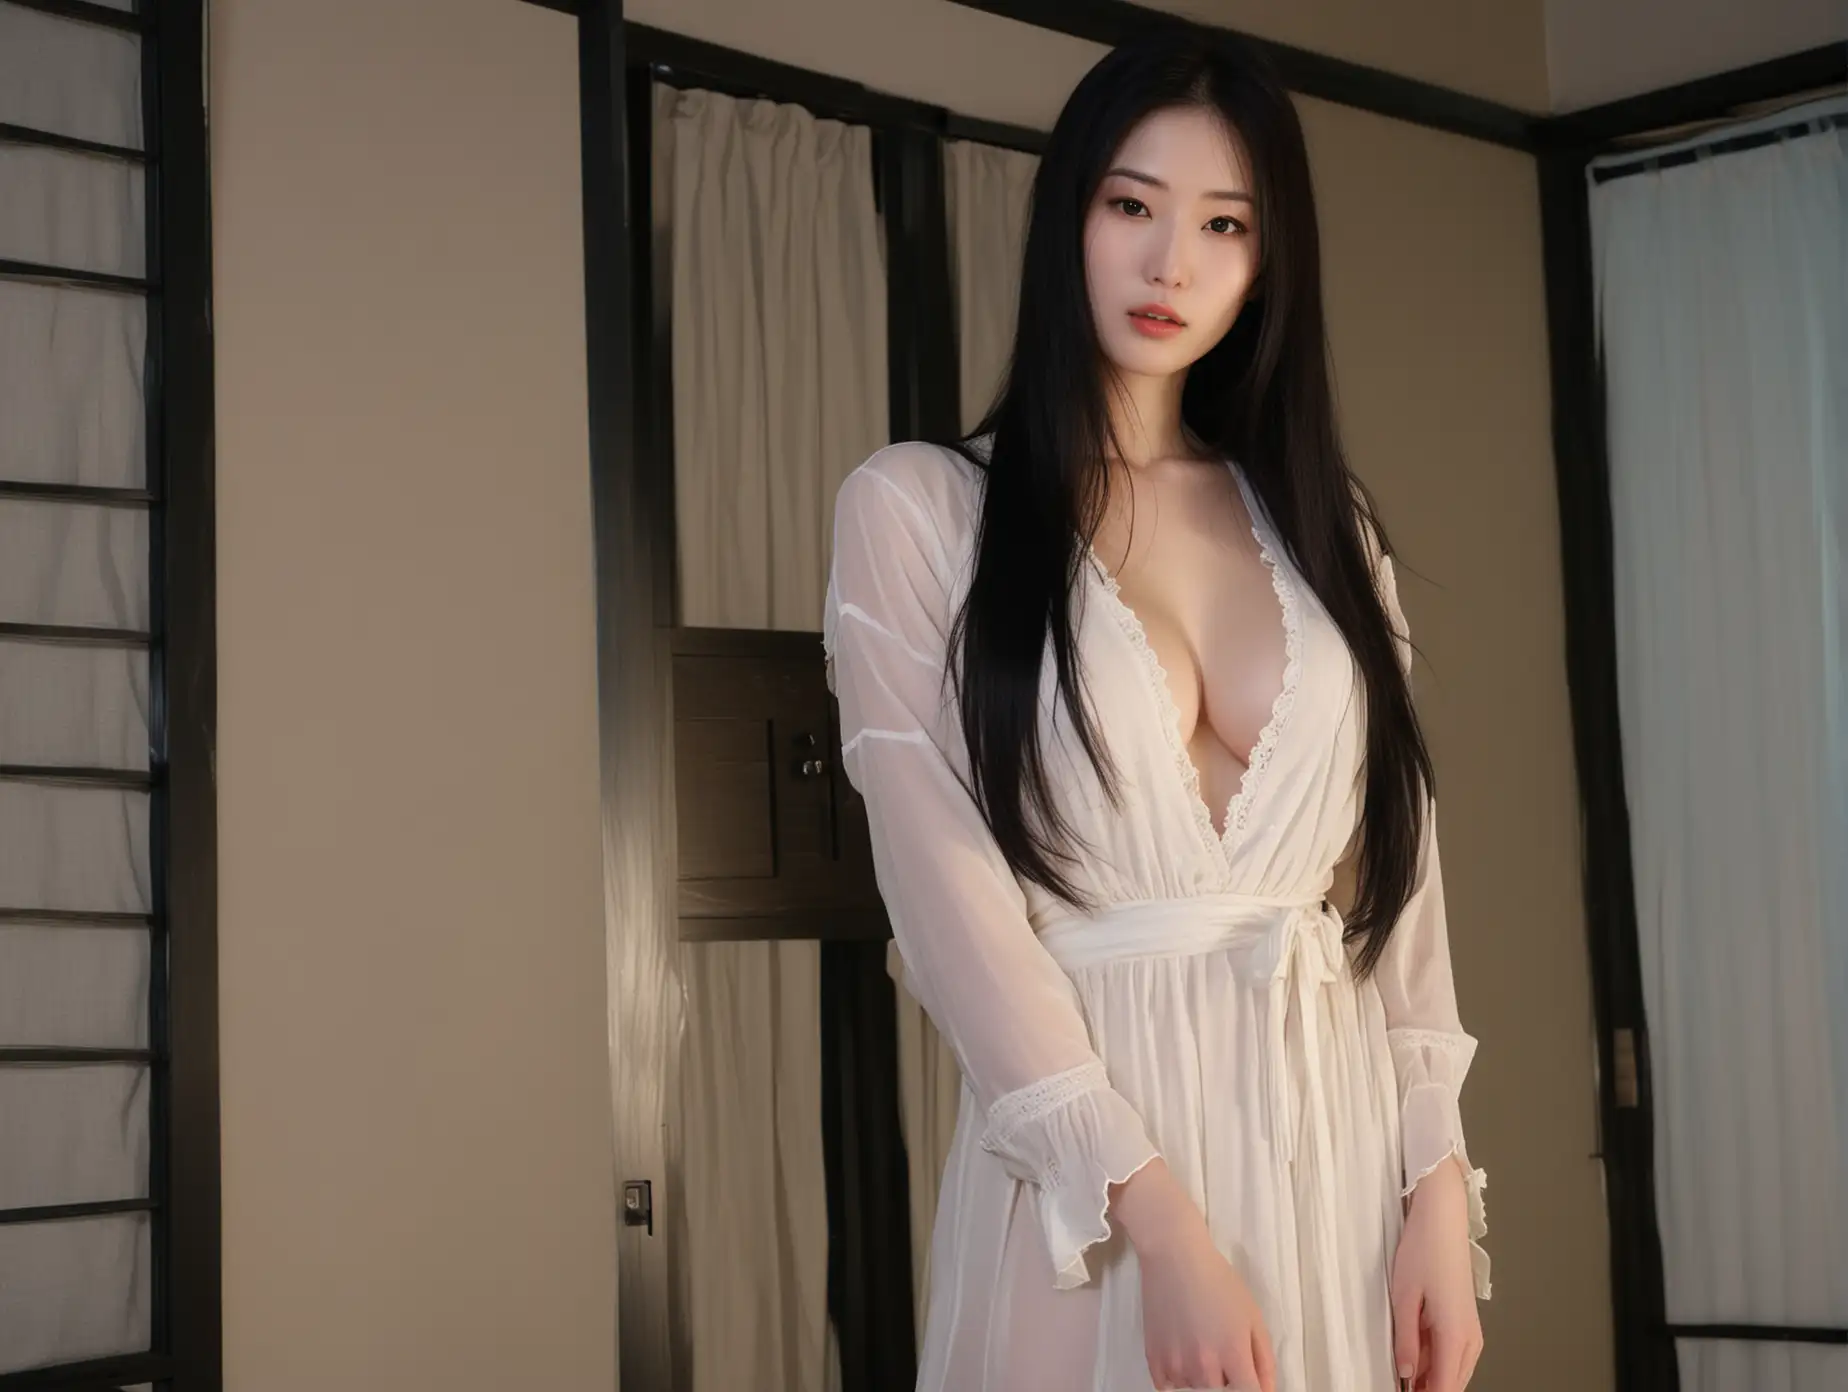 Hasshaku-sama, menacingly (tall:1.6) (pale:1.6) voluptuous Japanese woman, deceptively beautiful, long straight black hair, soulless eyes, eyes half closed, lustful gaze, soft flattering white summer dress, (large:1.3) (natural:1.1) breasts, wide hips, thick thighs, (standing over viewer:1.5), seductive, dominant, spacious Japanese bedroom with sliding doors, (night time:1.5), (dark room:1.5), interiors and décor are both traditional and contemporary,

(horror:1.5), (low angle:1.5), highly detailed, random details, imperfection, detailed face, detailed body, detailed skin textures, skin pores, detailed colours hues tones patterns,